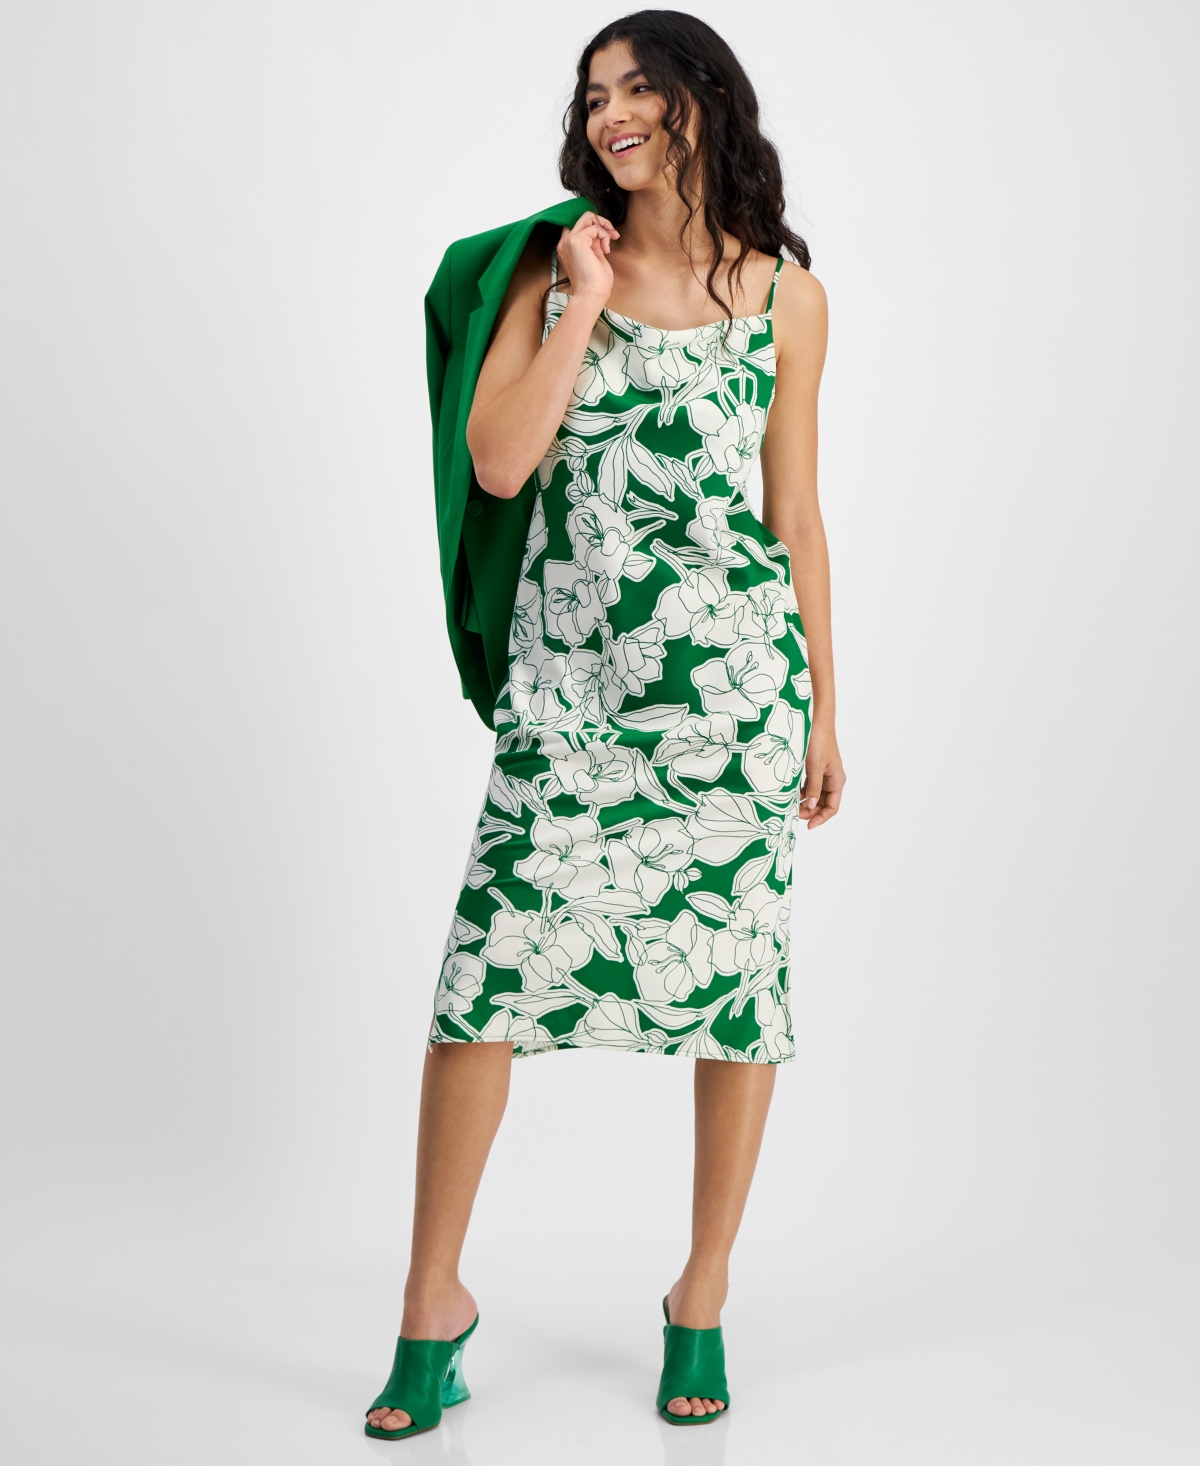 Women's Printed Scoop-Neck Spaghetti-Strap Dress, Created for Macy's - Green Chili